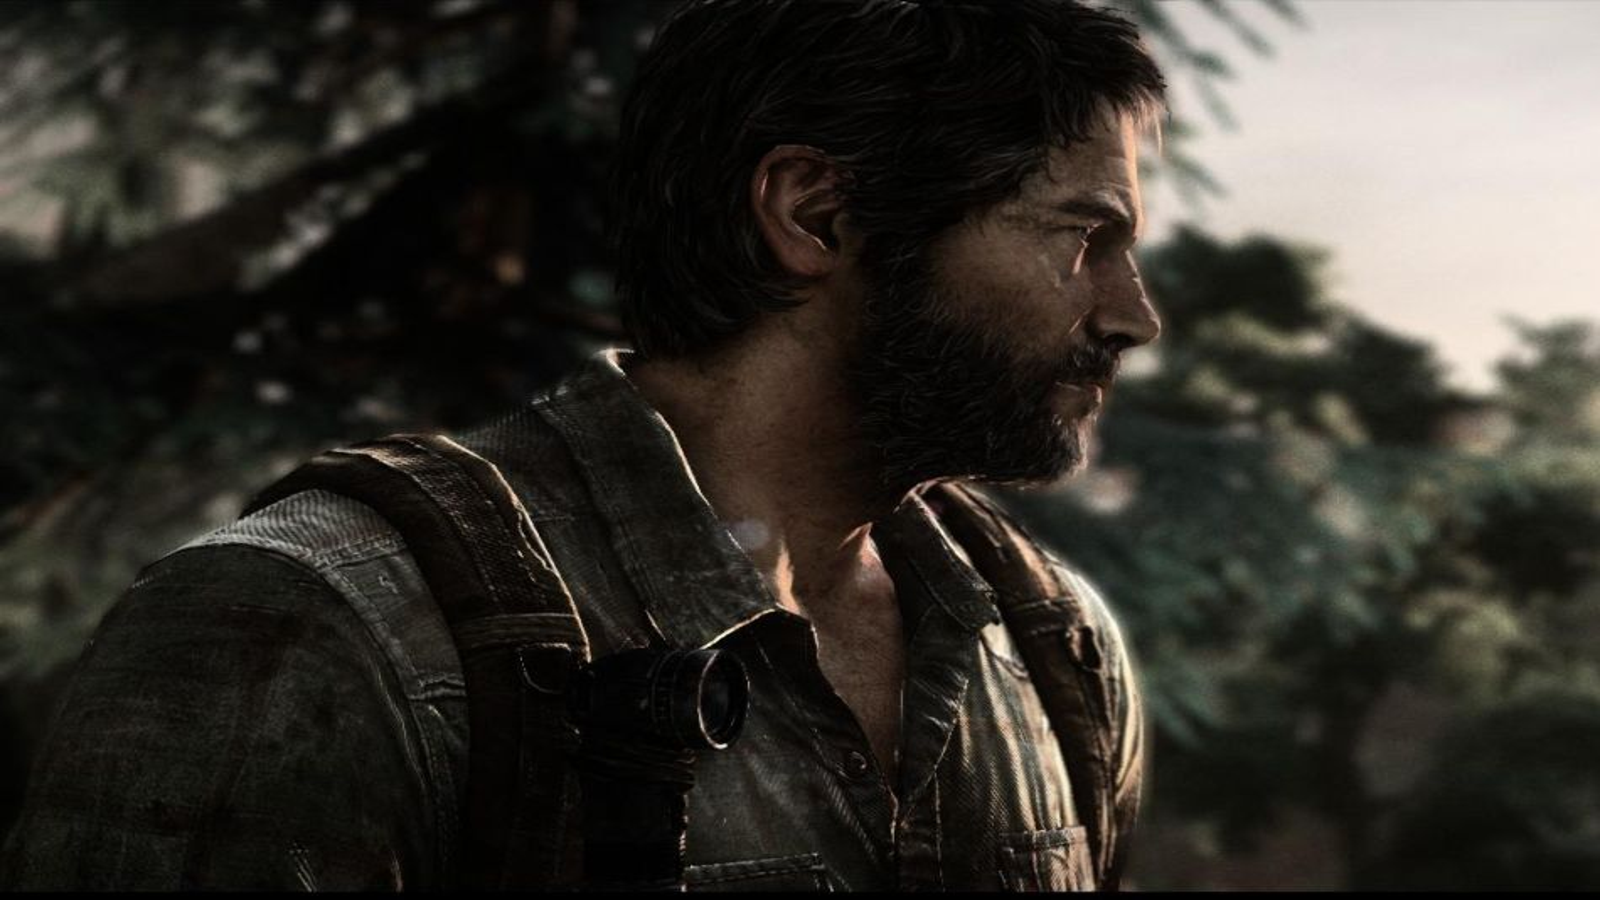 Wallpaper Engine The Last of Us HDR 